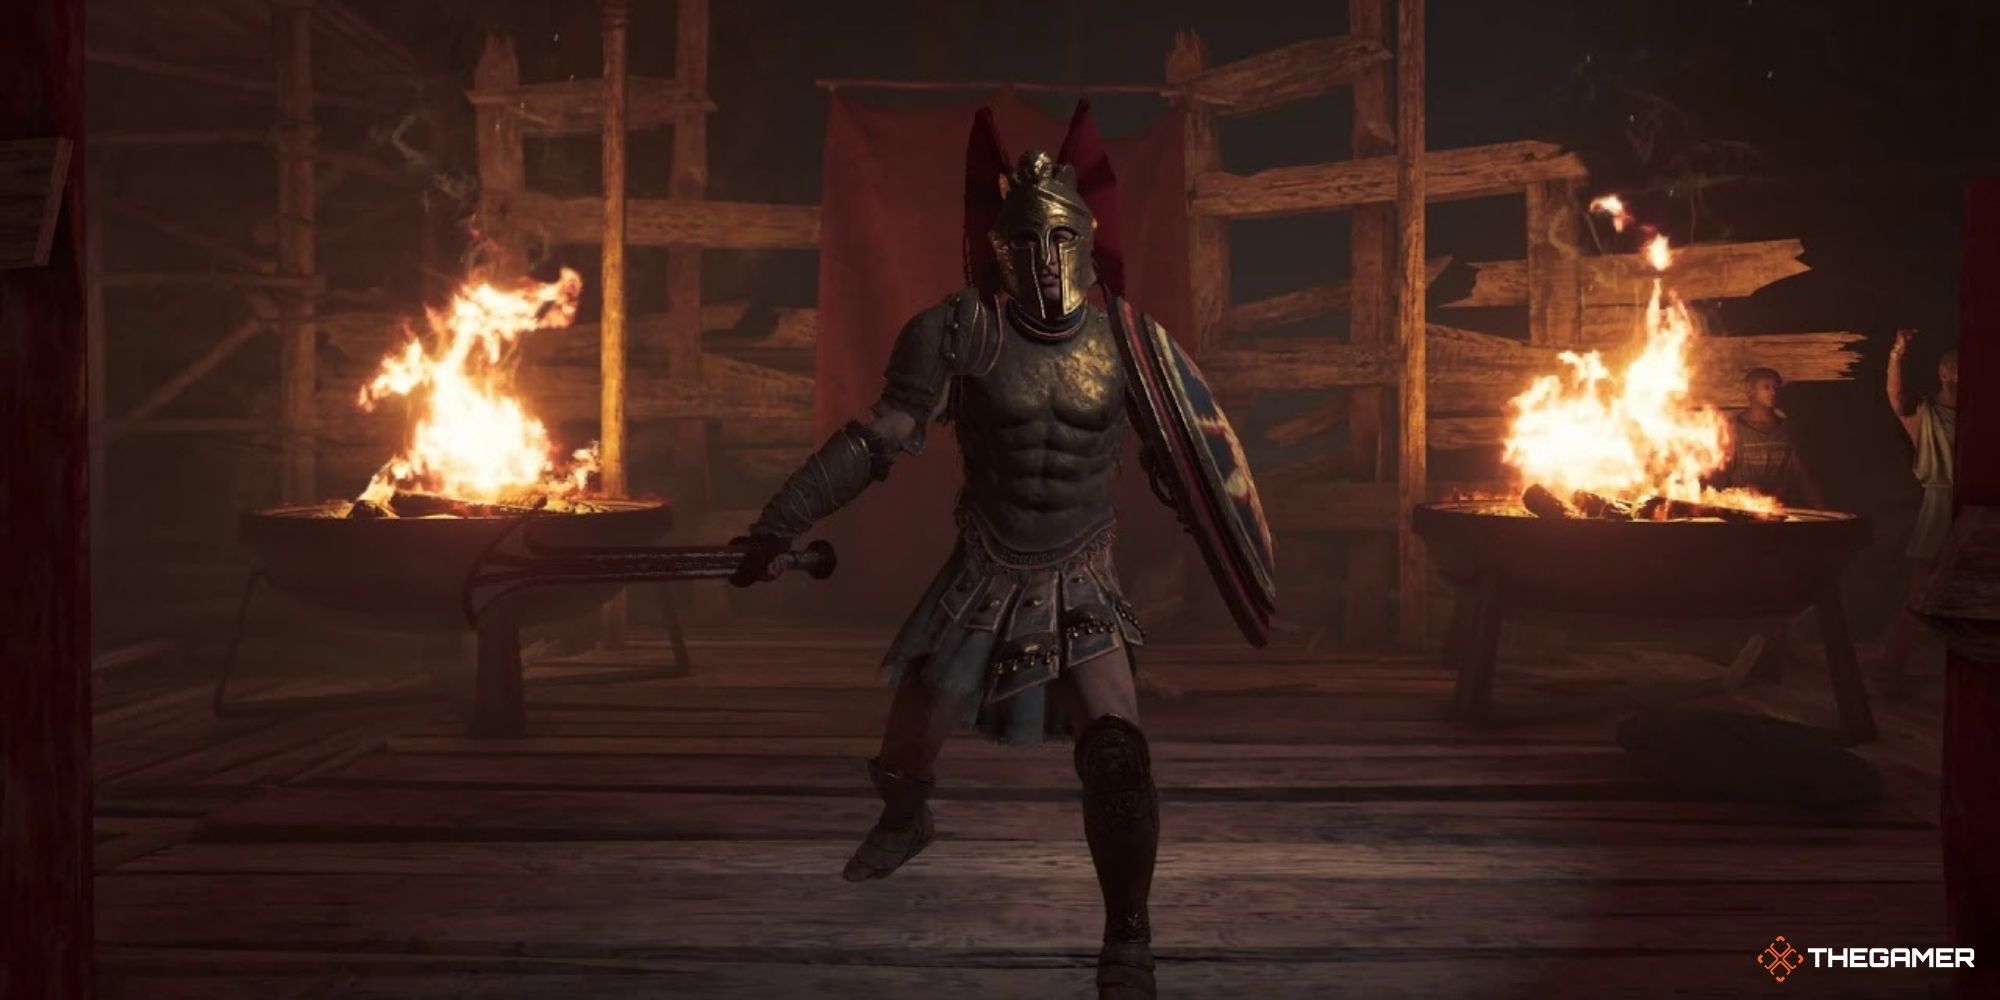 assassin's creed odyssey - Vasilis, King of the Arena